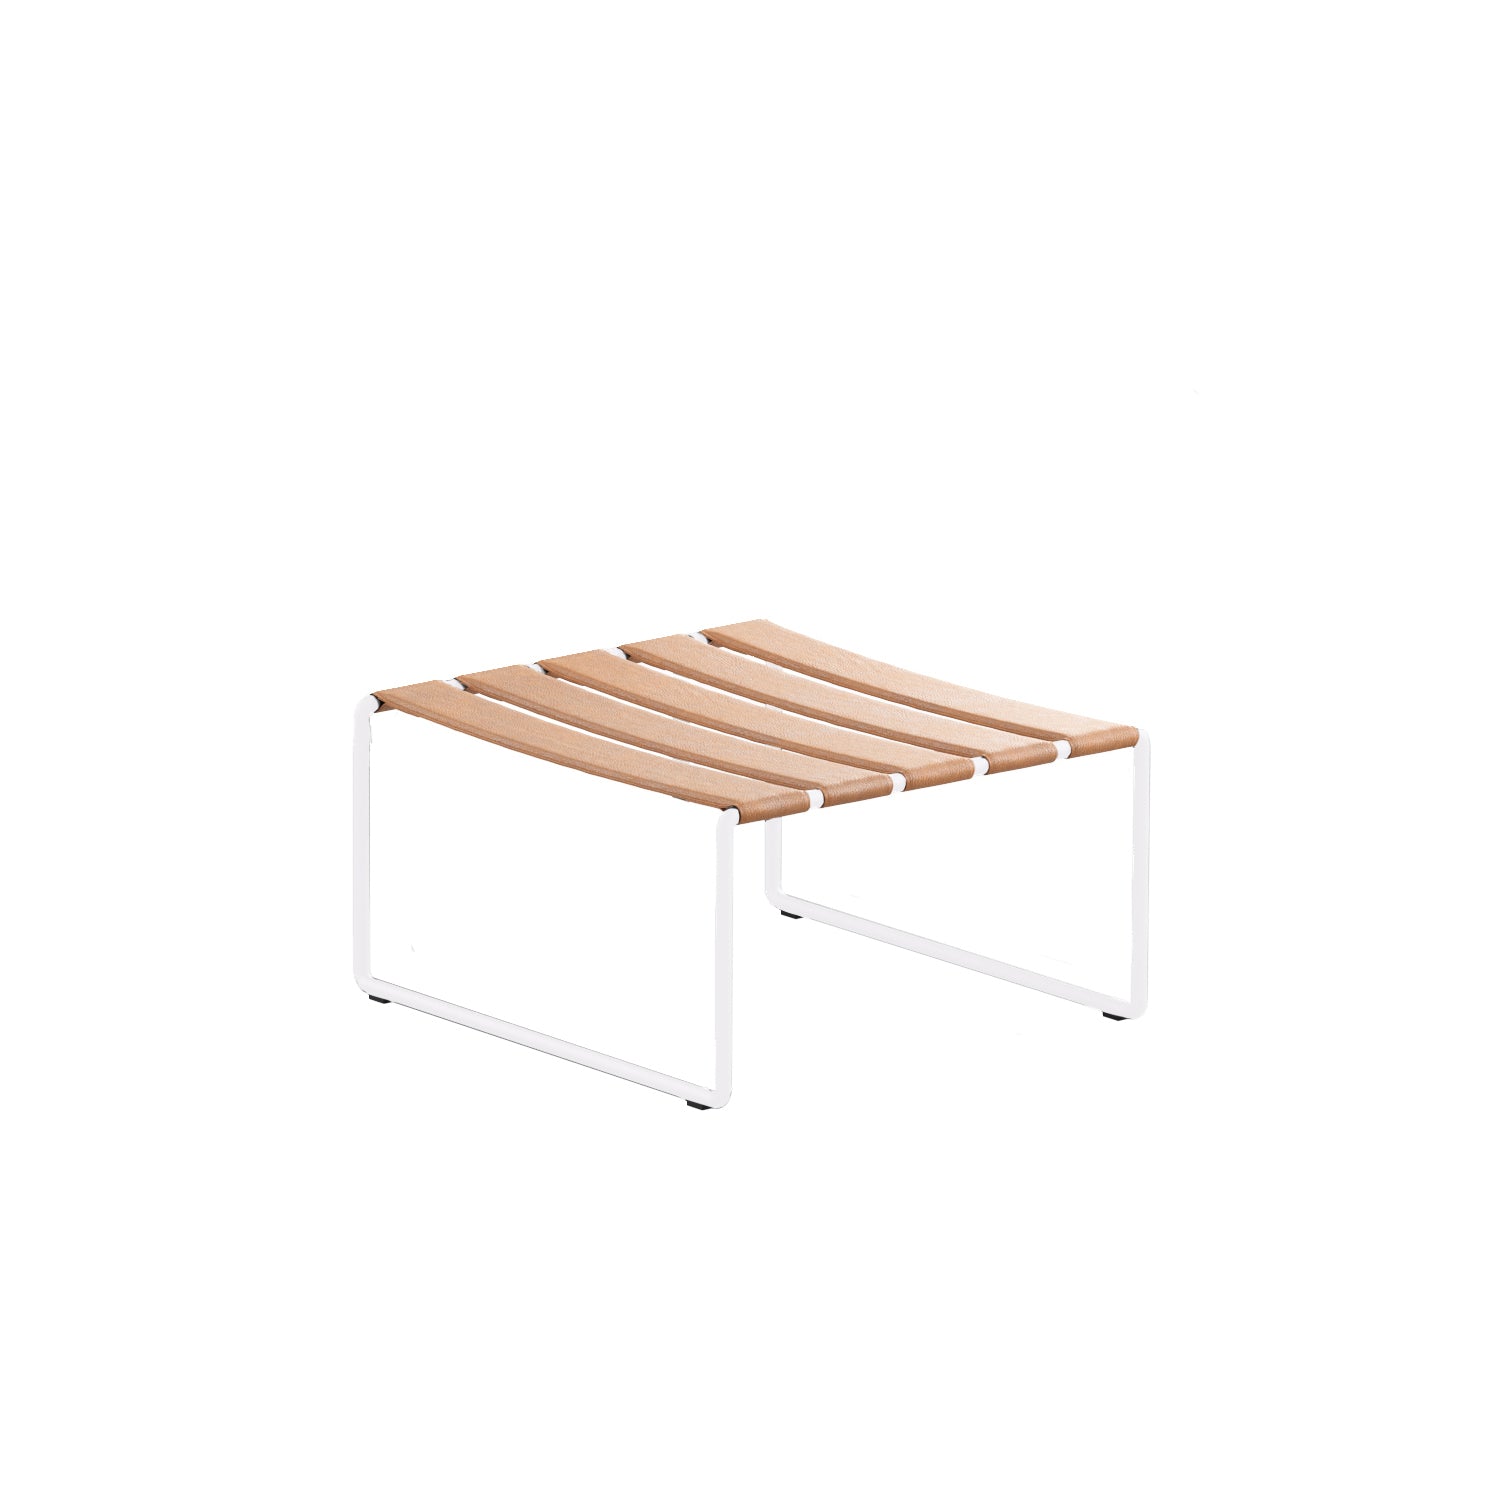 Strappy footrest in white and cognac